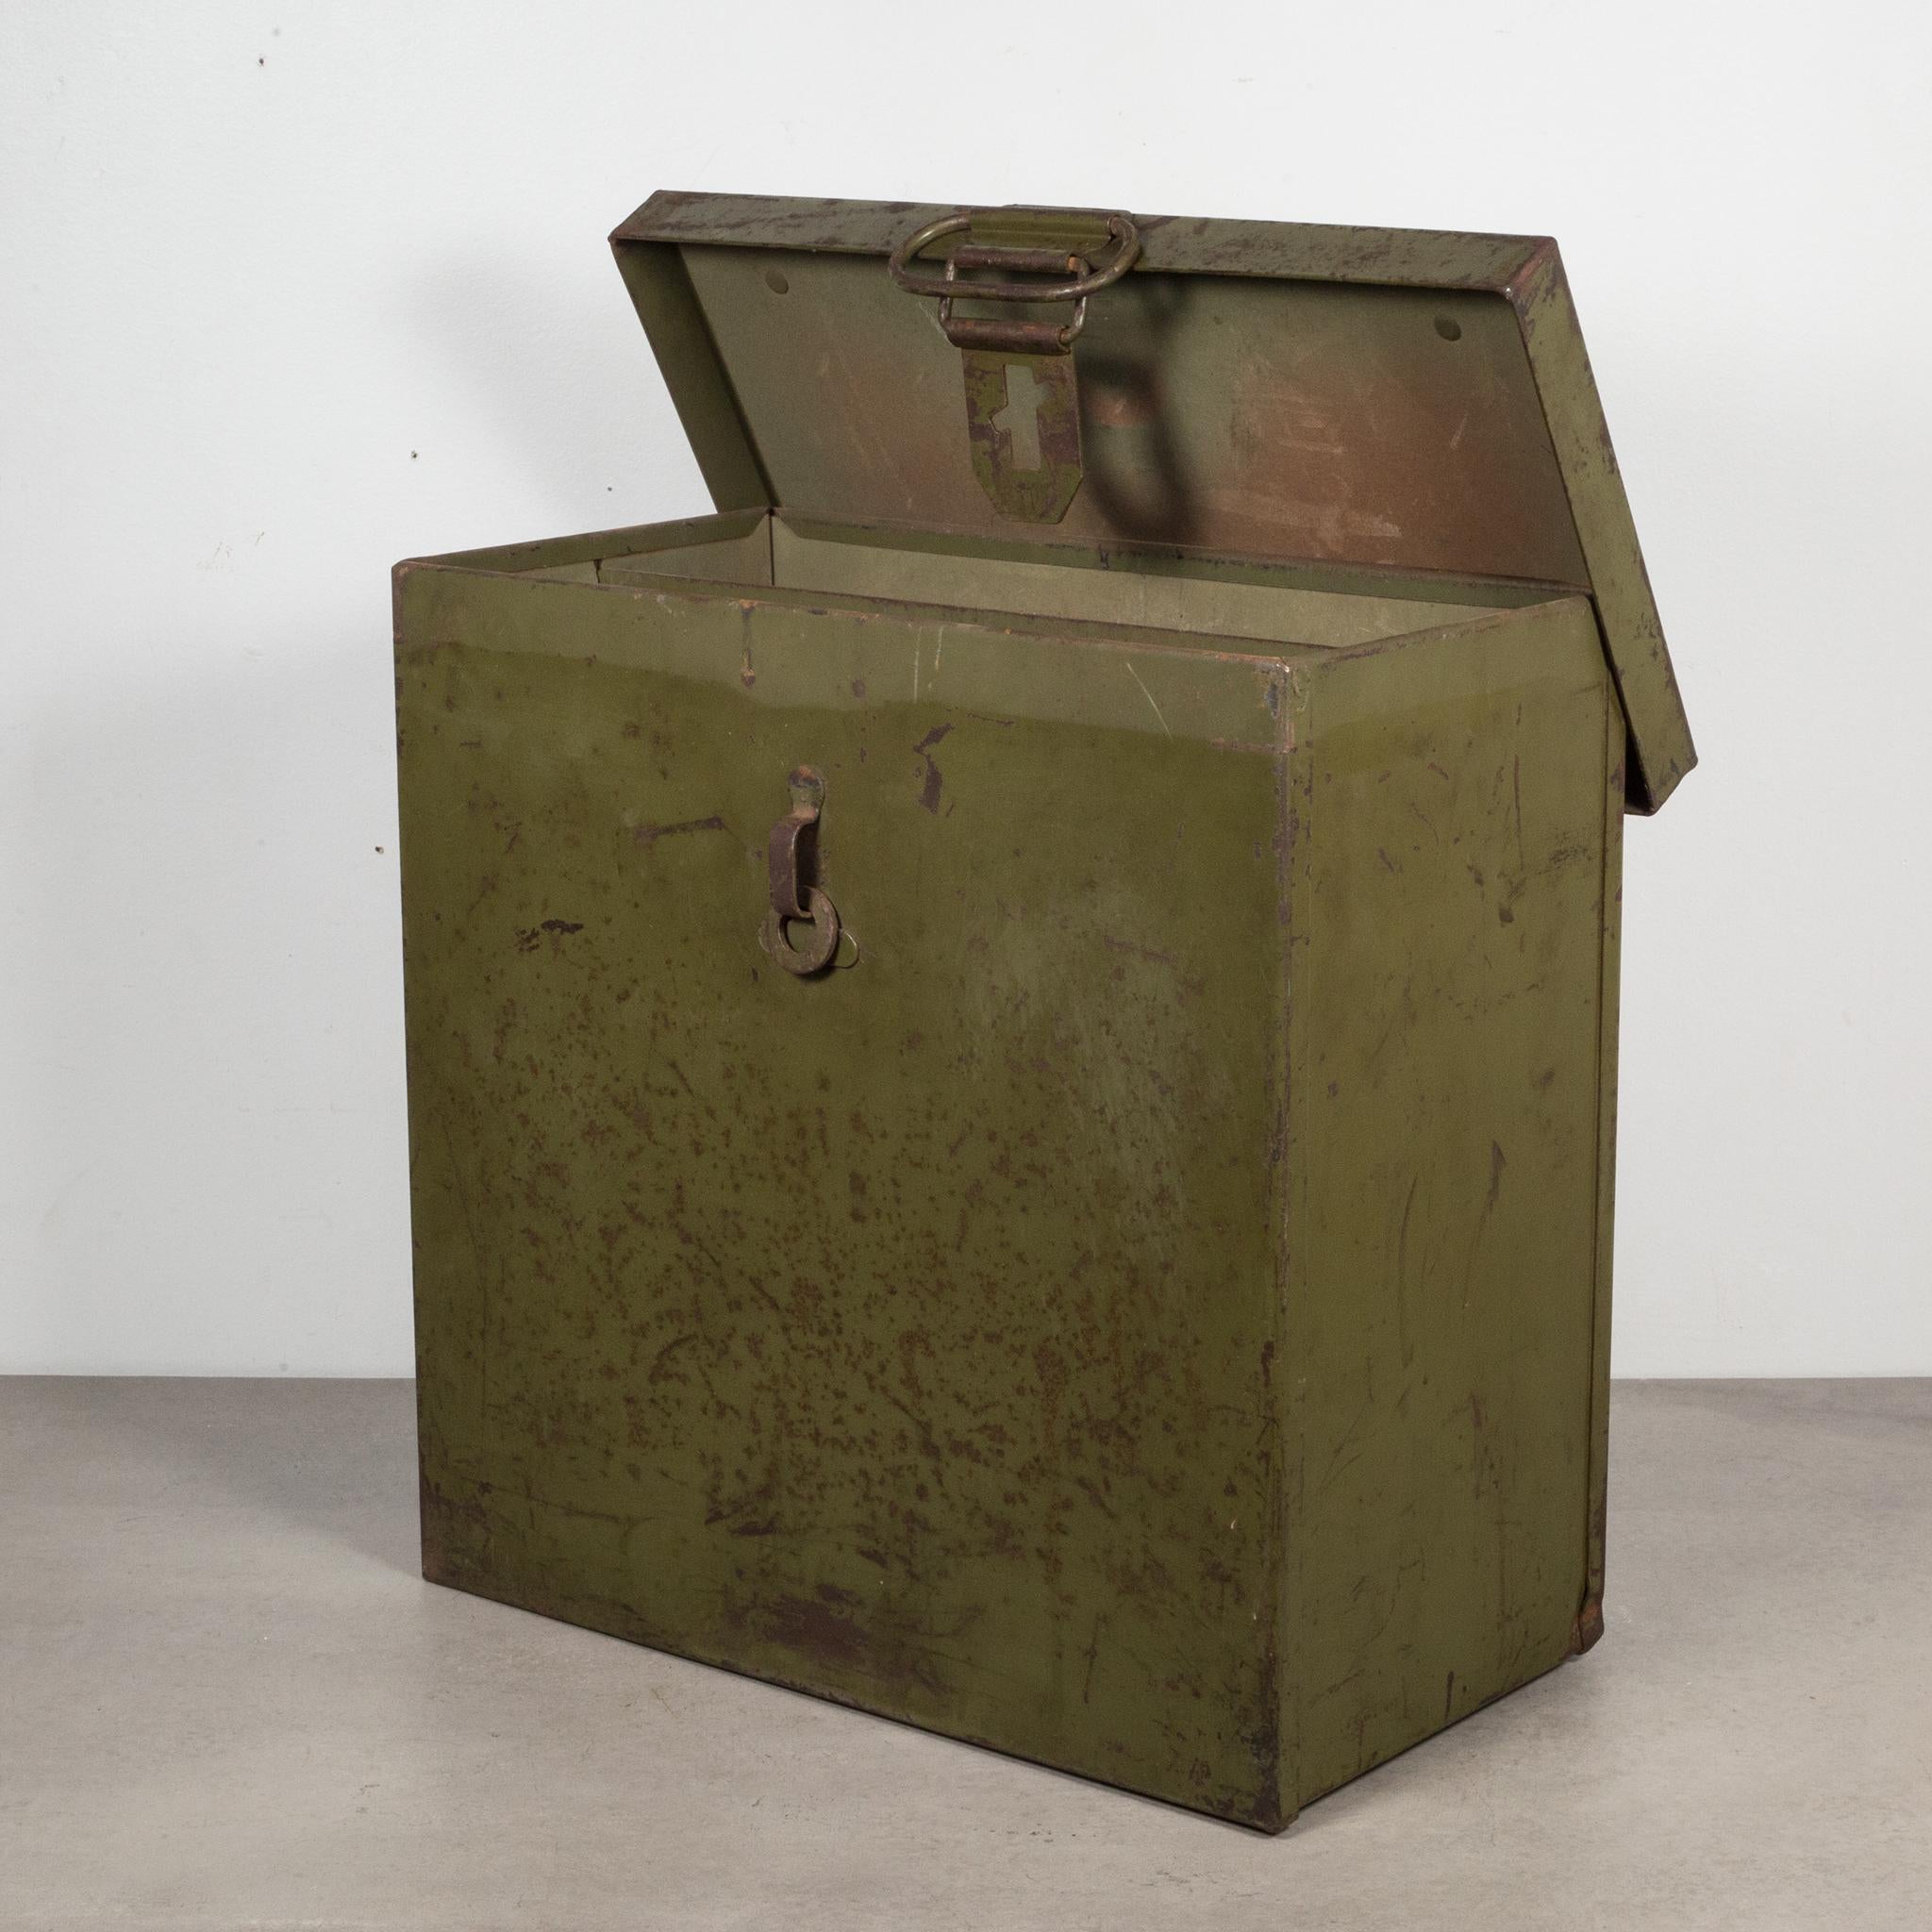 About

An antique galvanized steel shipping strongbox for movie film reels. The box contains a unique lock ring which needs to be lined up to remove.

Creator: Pathe Exchange Inc. 
Date of manufacture: c.1920.
Materials and techniques: